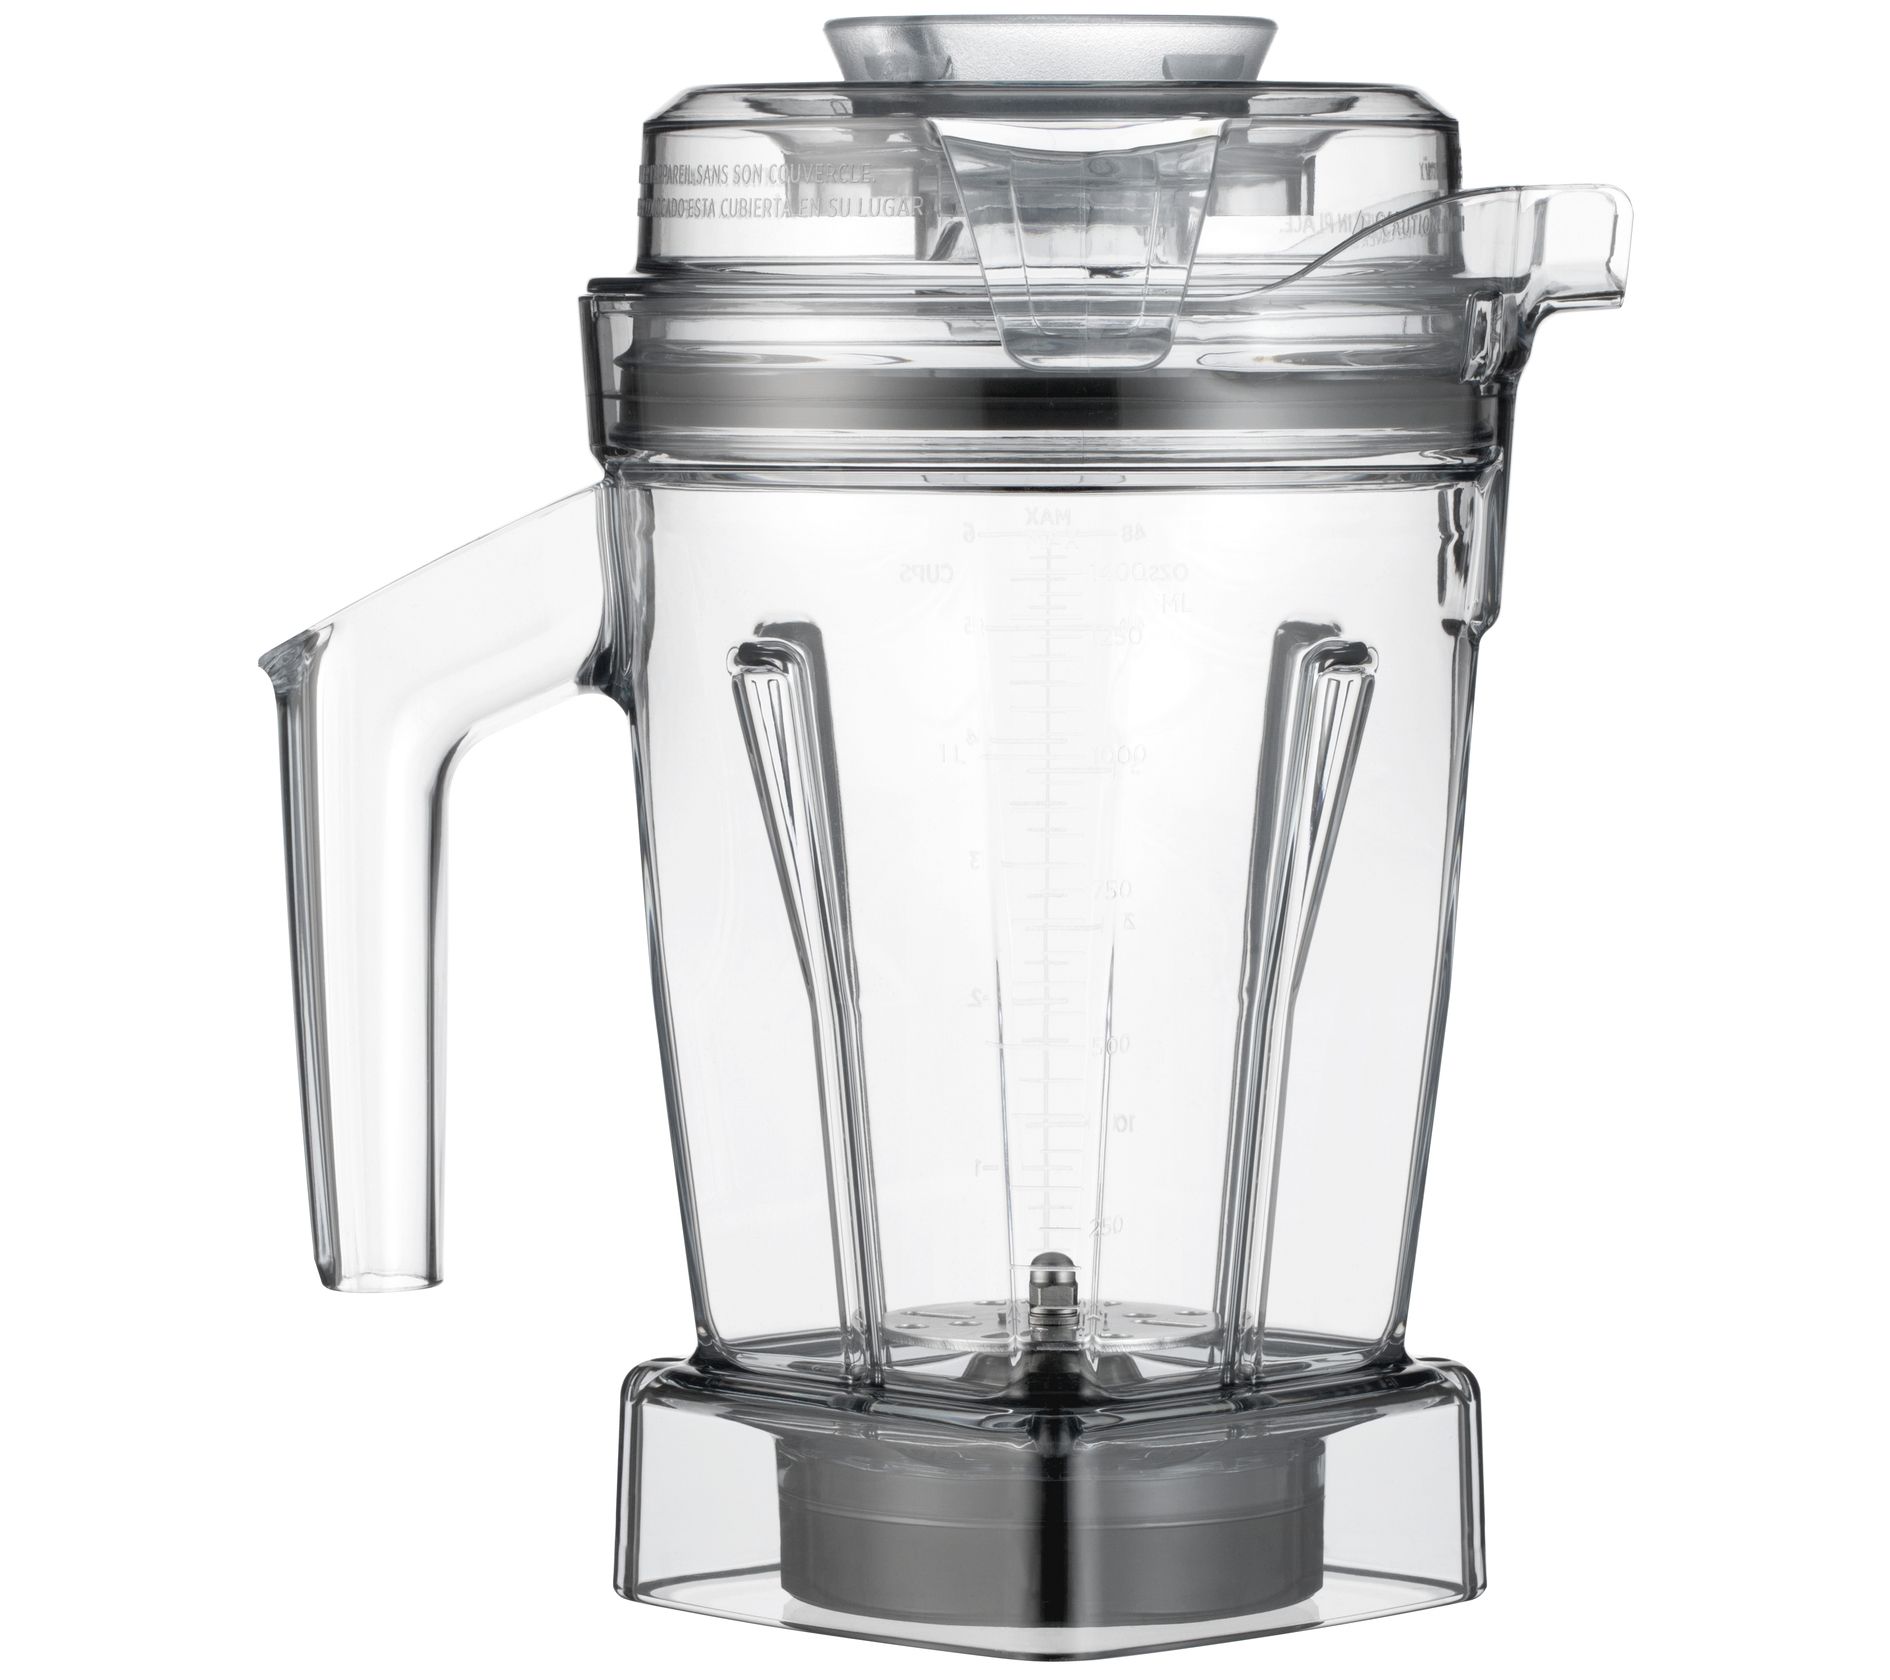 A Vitamix Blender Sale Is Happening Now at QVC - PureWow